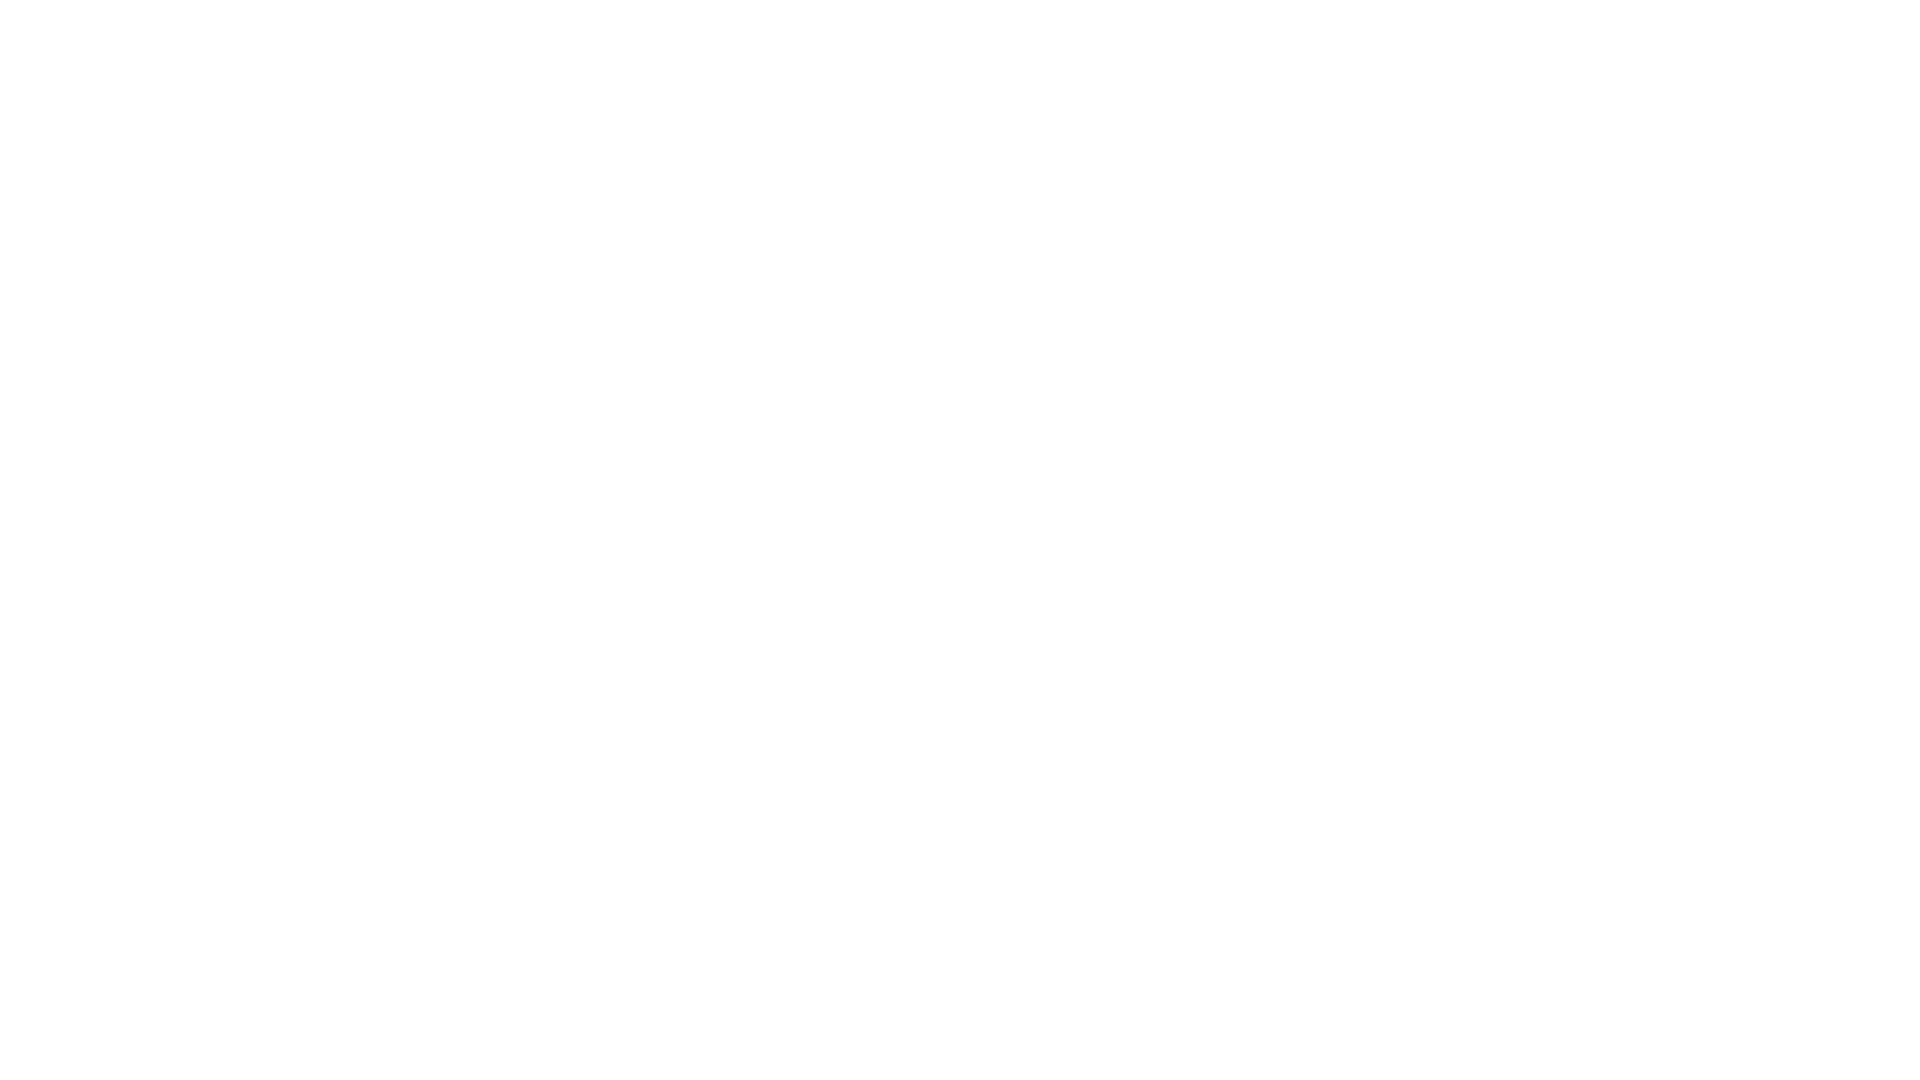 The 85 at Midlands Terrace